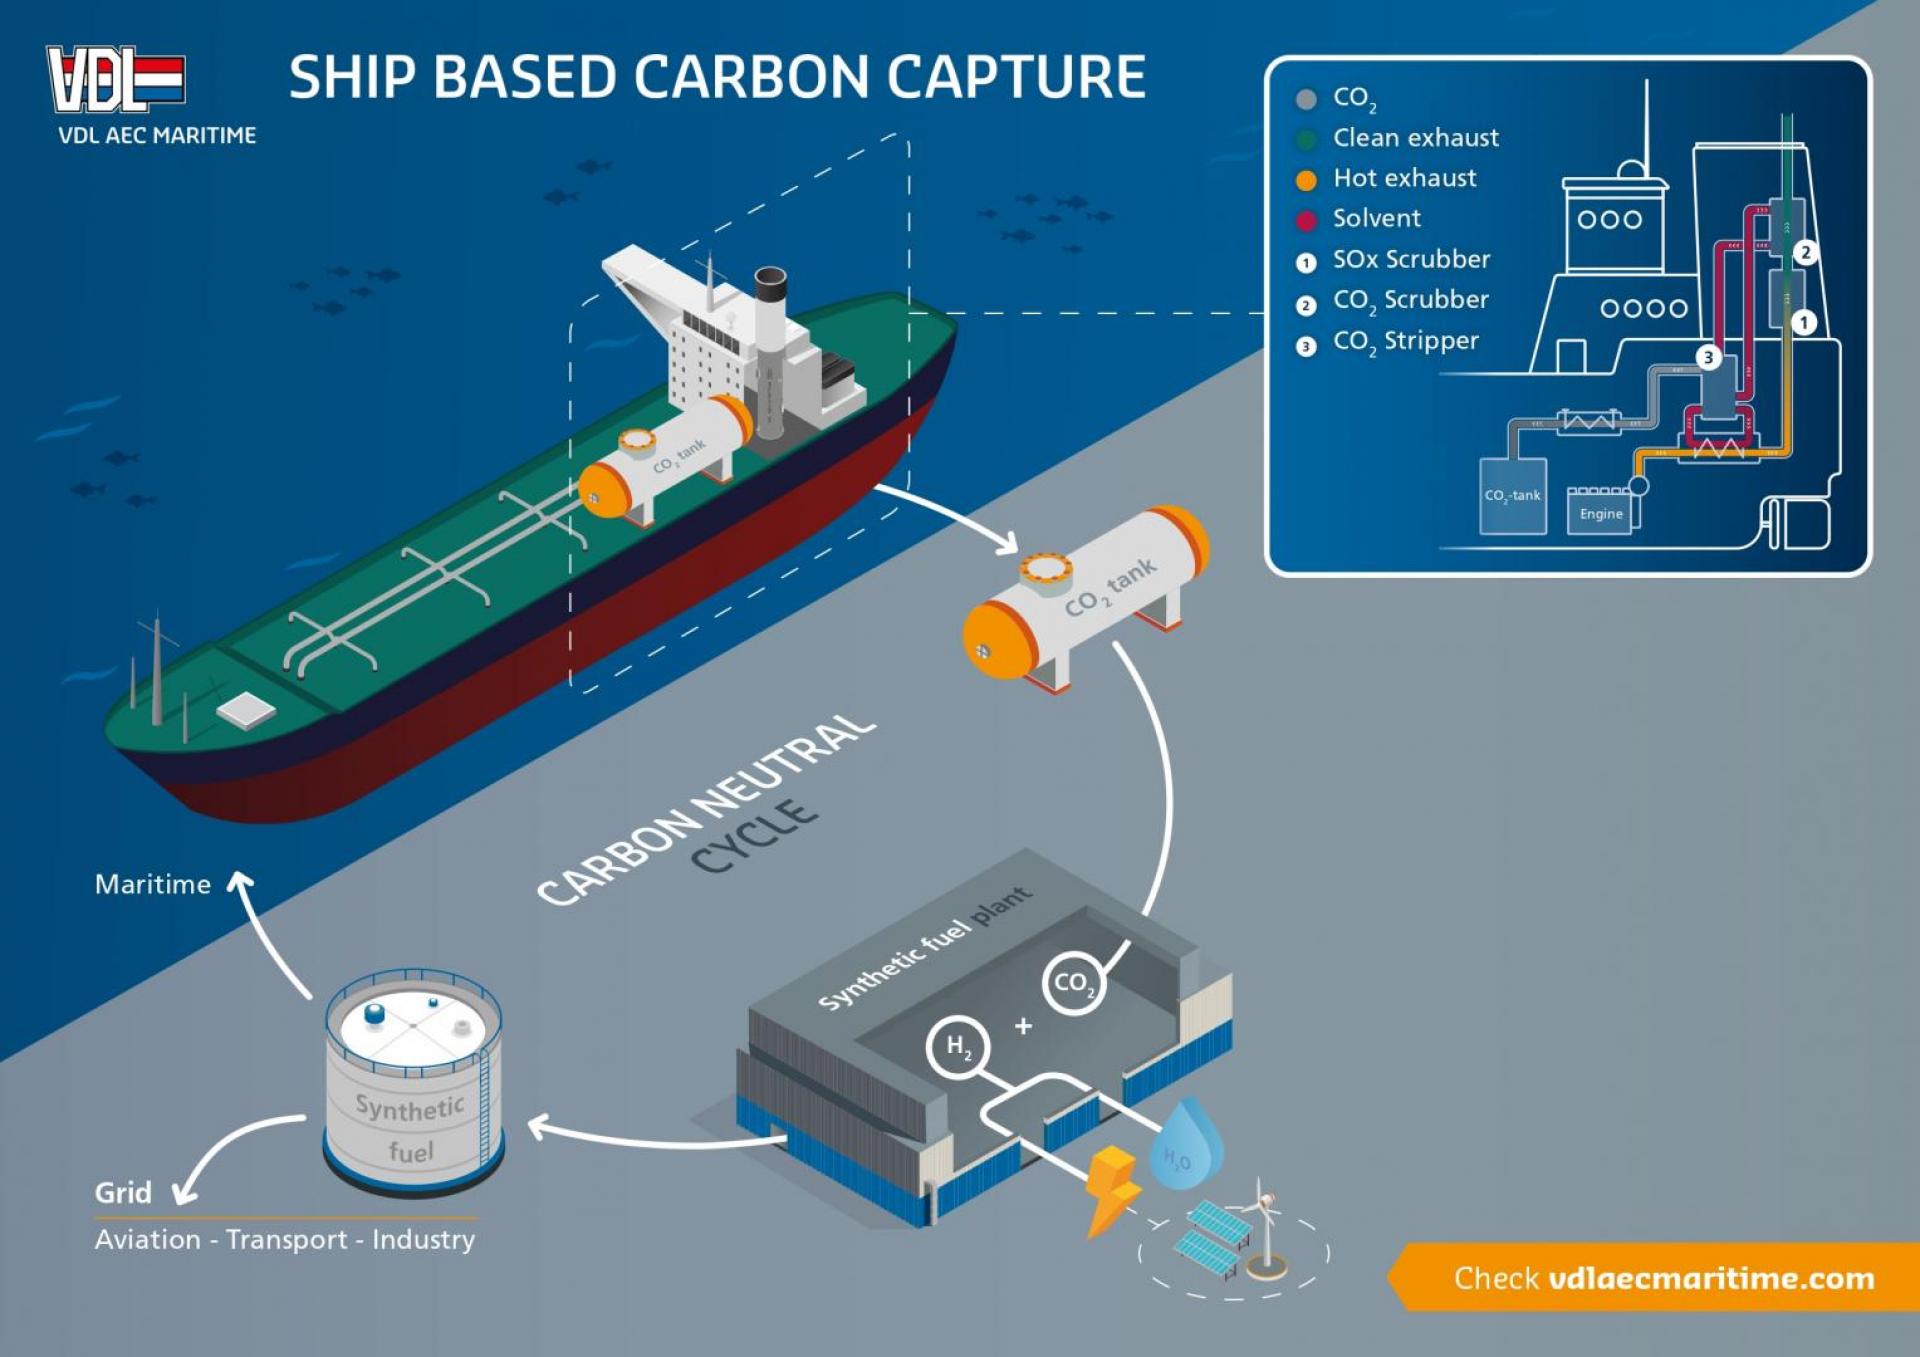 246_MAR_21006_VDL-Infographic-Shipping-Carbon-Neutral-Cycle_Olietanker_001_page-0001.jpg